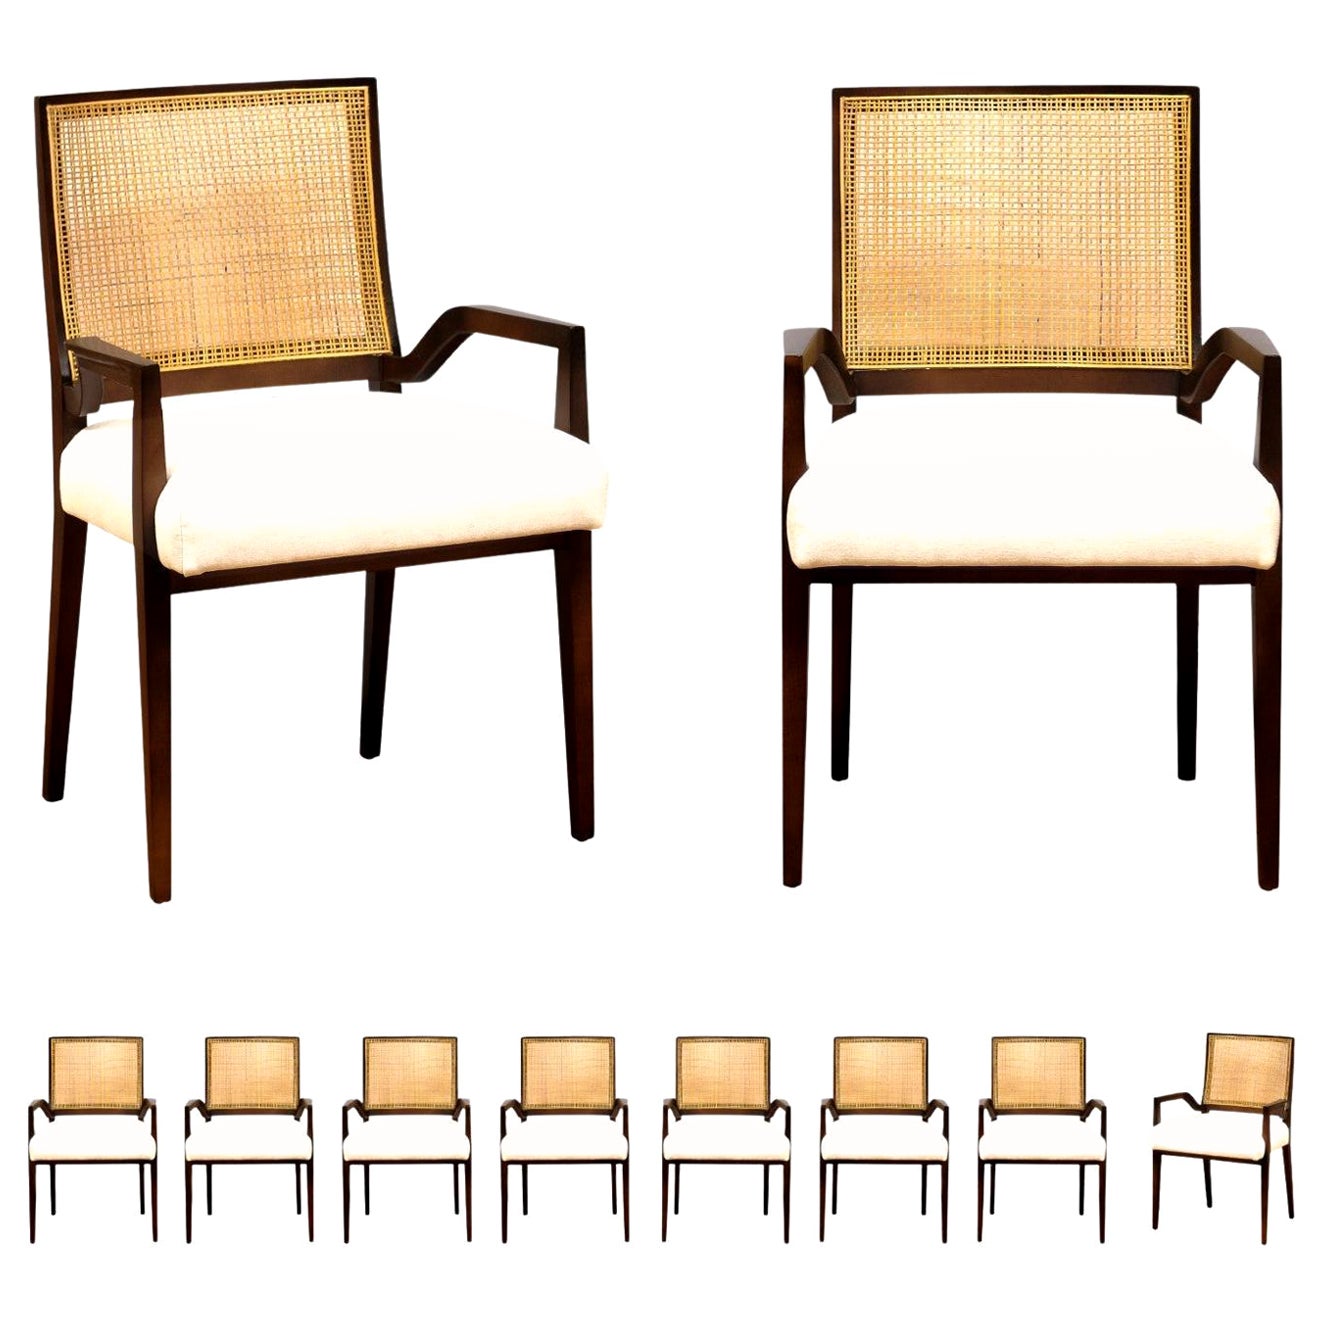 All Arms, Unrivaled Set of 8 Cane Dining Chairs by Michael Taylor, circa 1960 For Sale